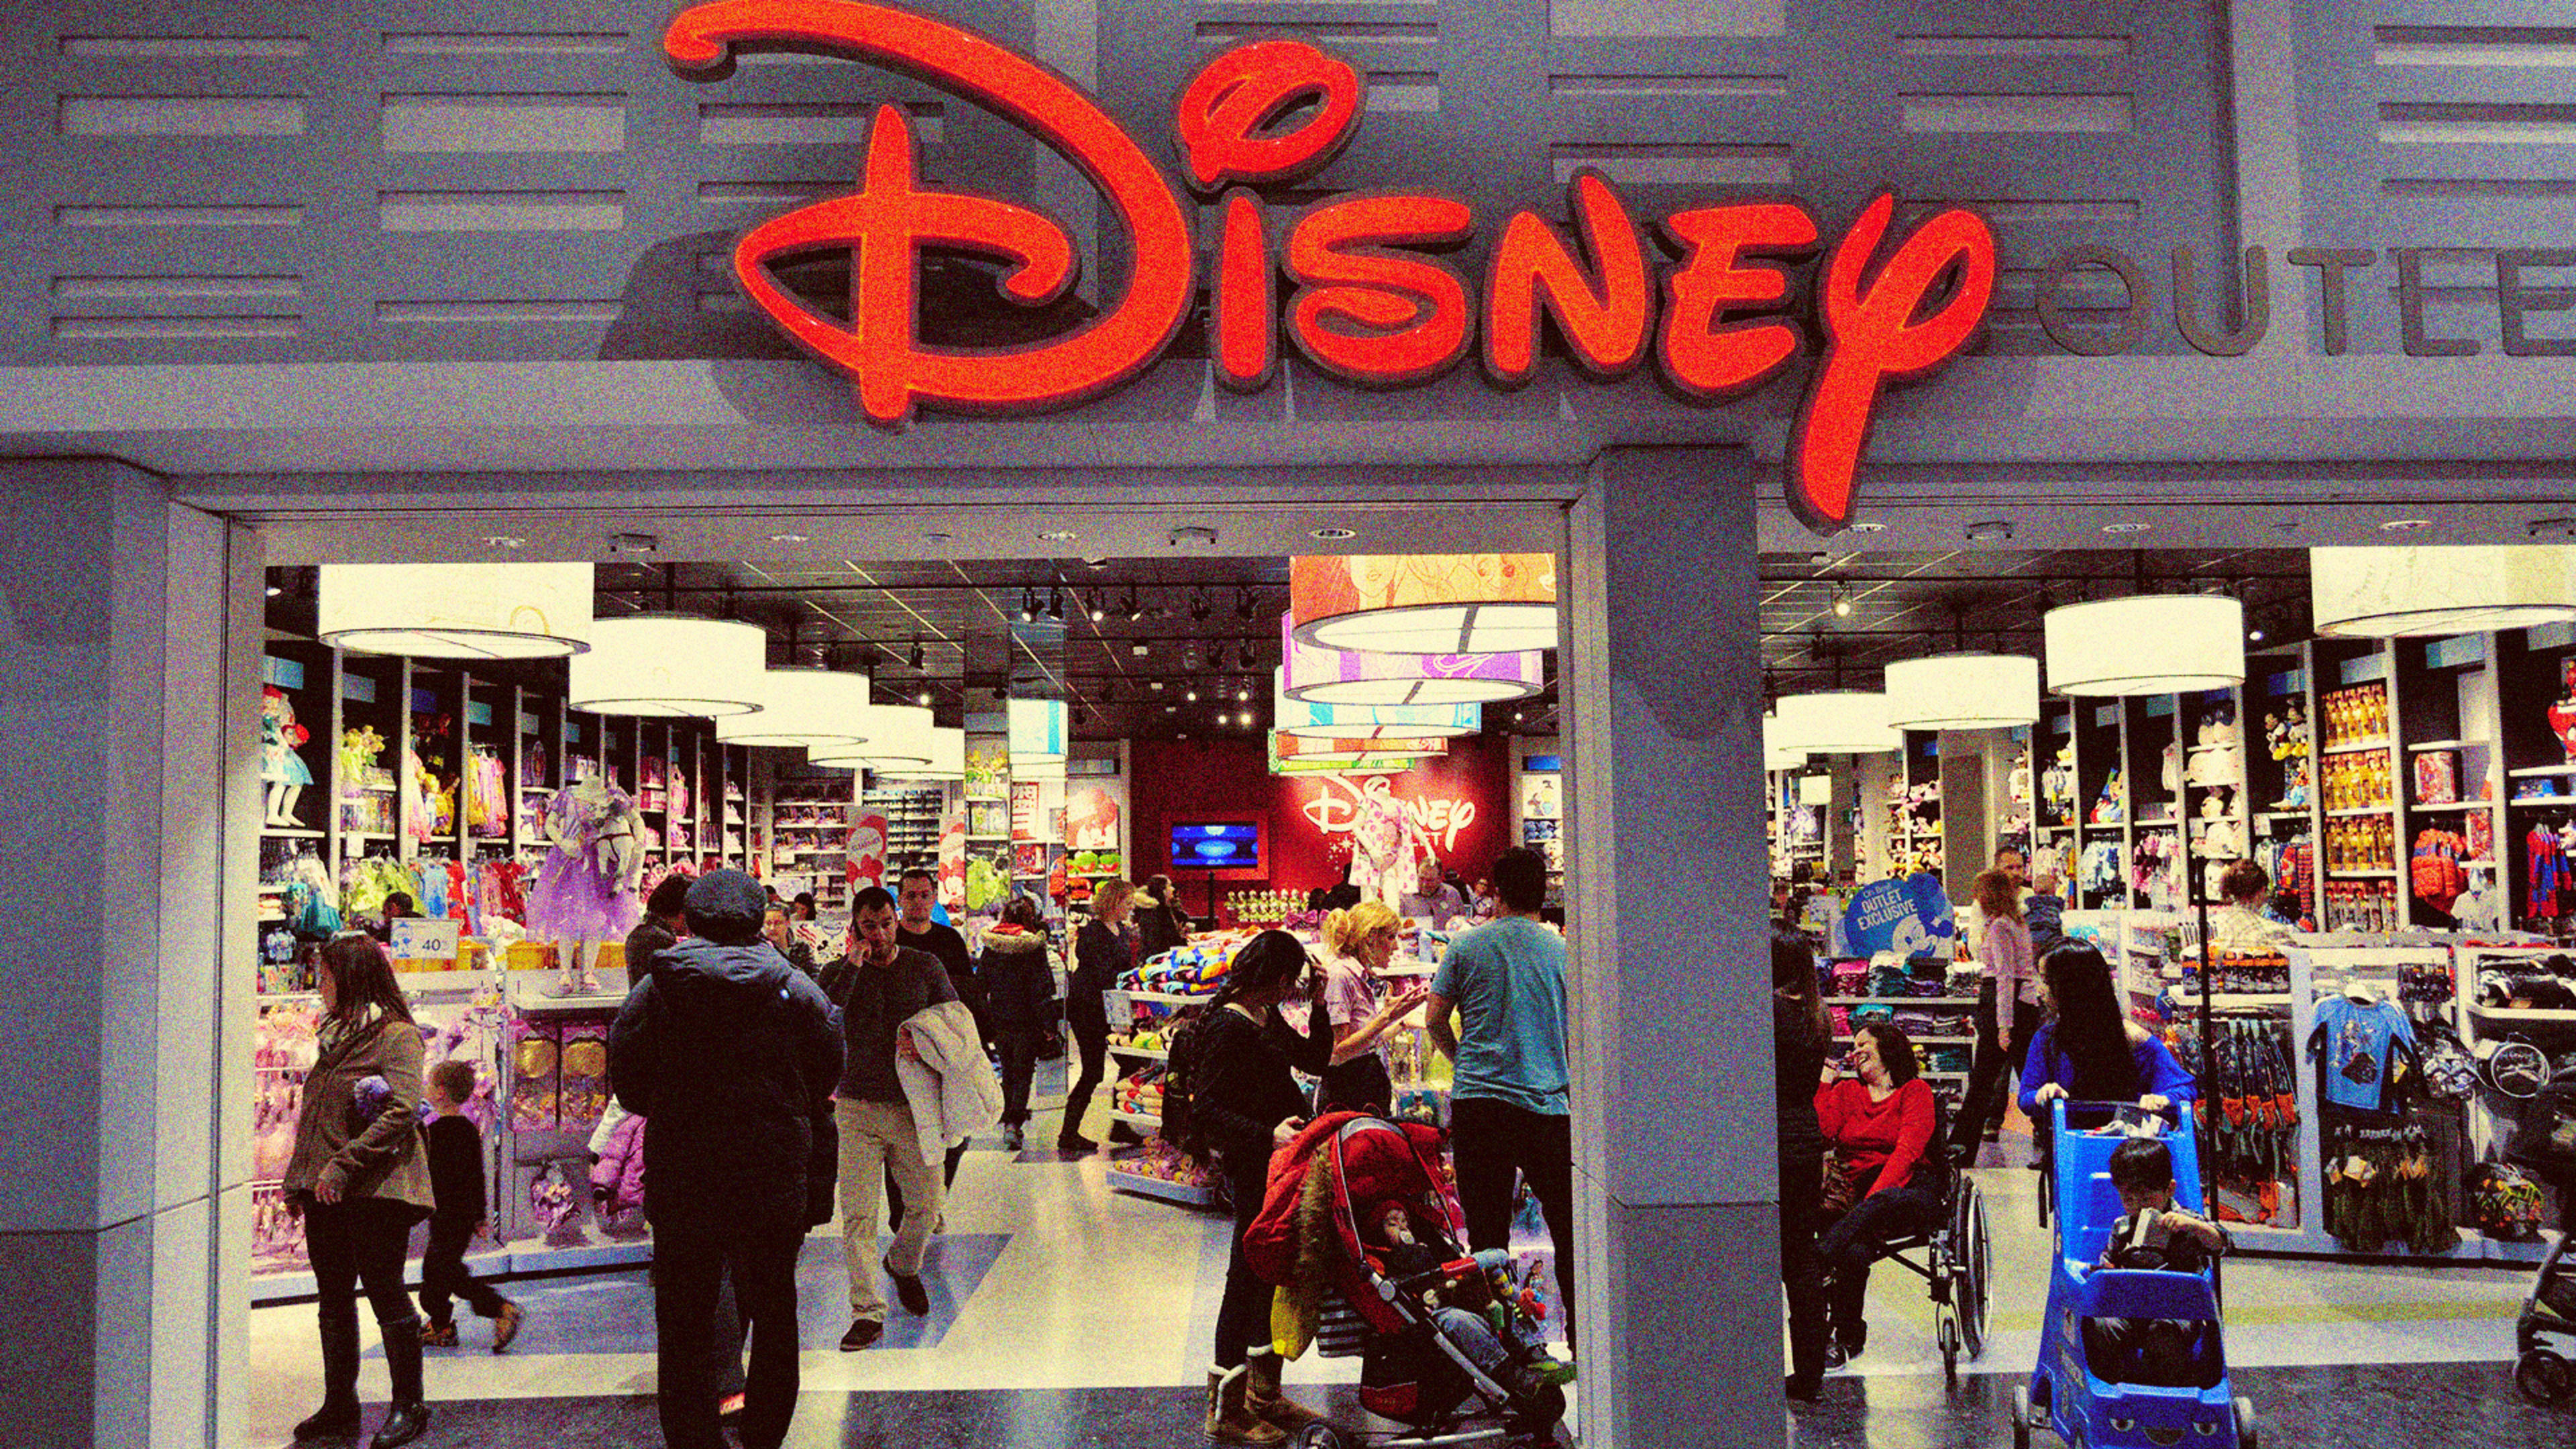 Disney Store is the latest retailer hit with an ADA lawsuit over Braille gift cards